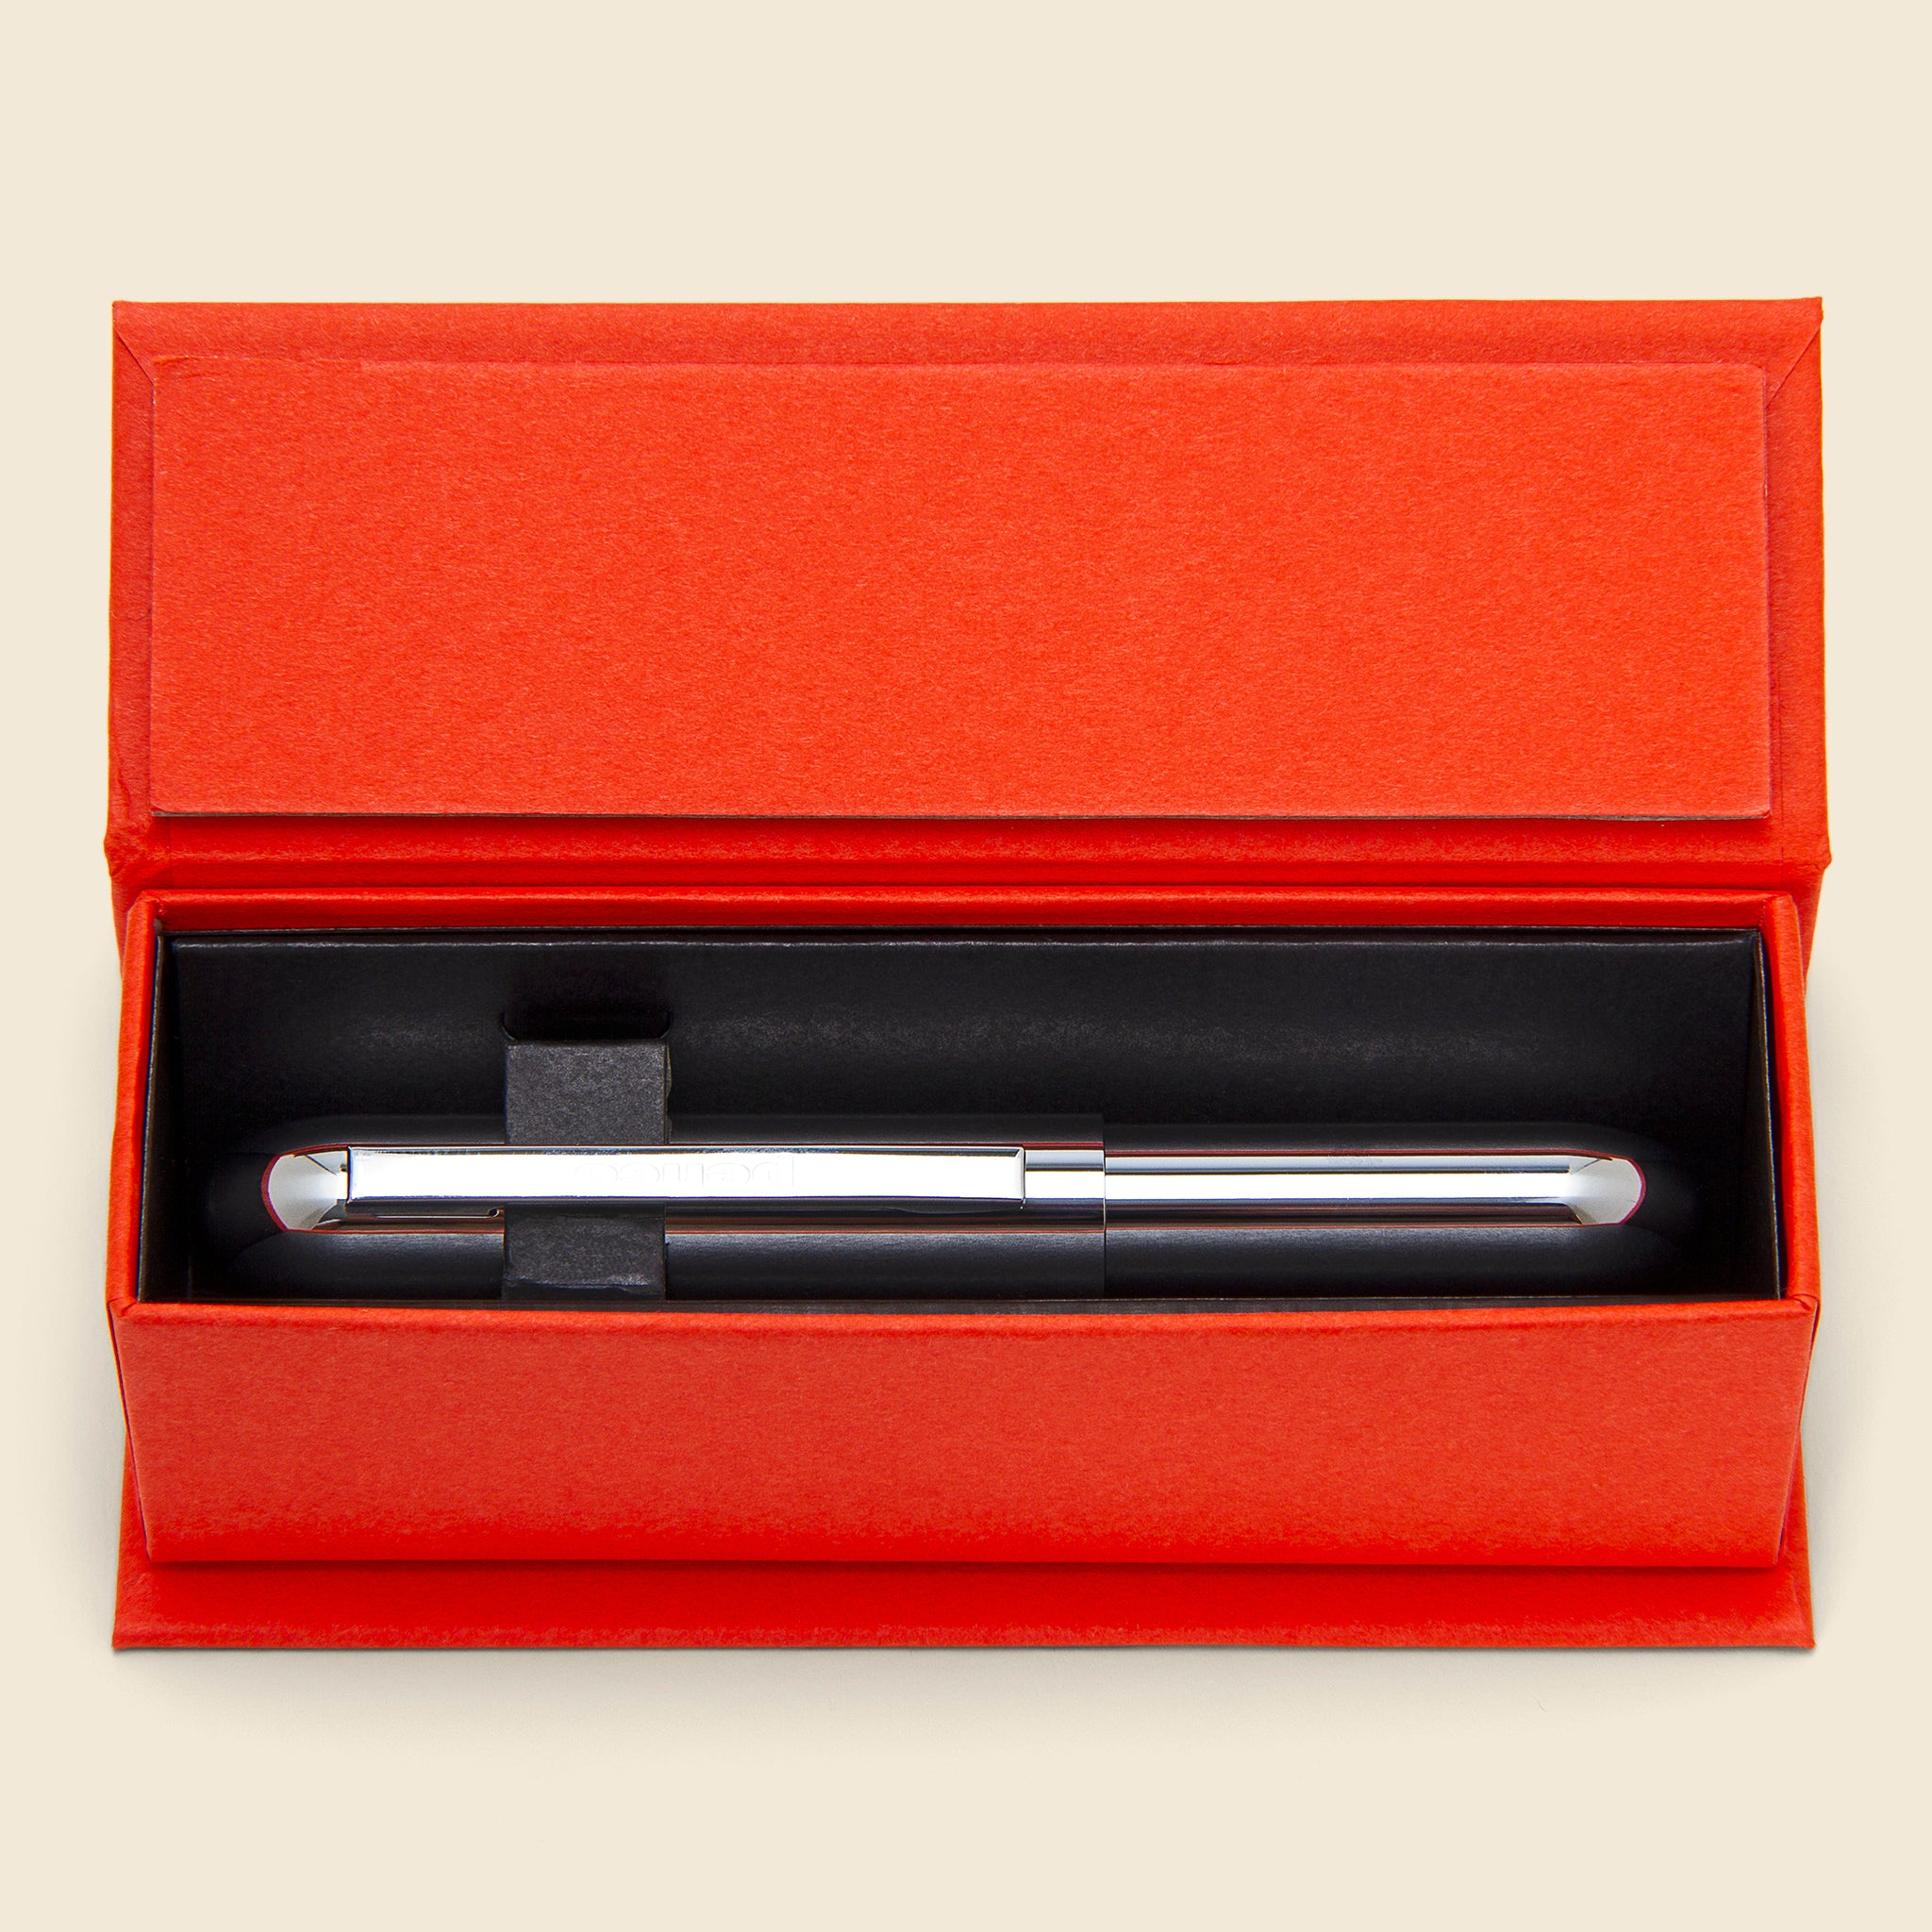 Bullet Pen - Silver - Paper Goods - STAG Provisions - Home - Office - Paper Goods